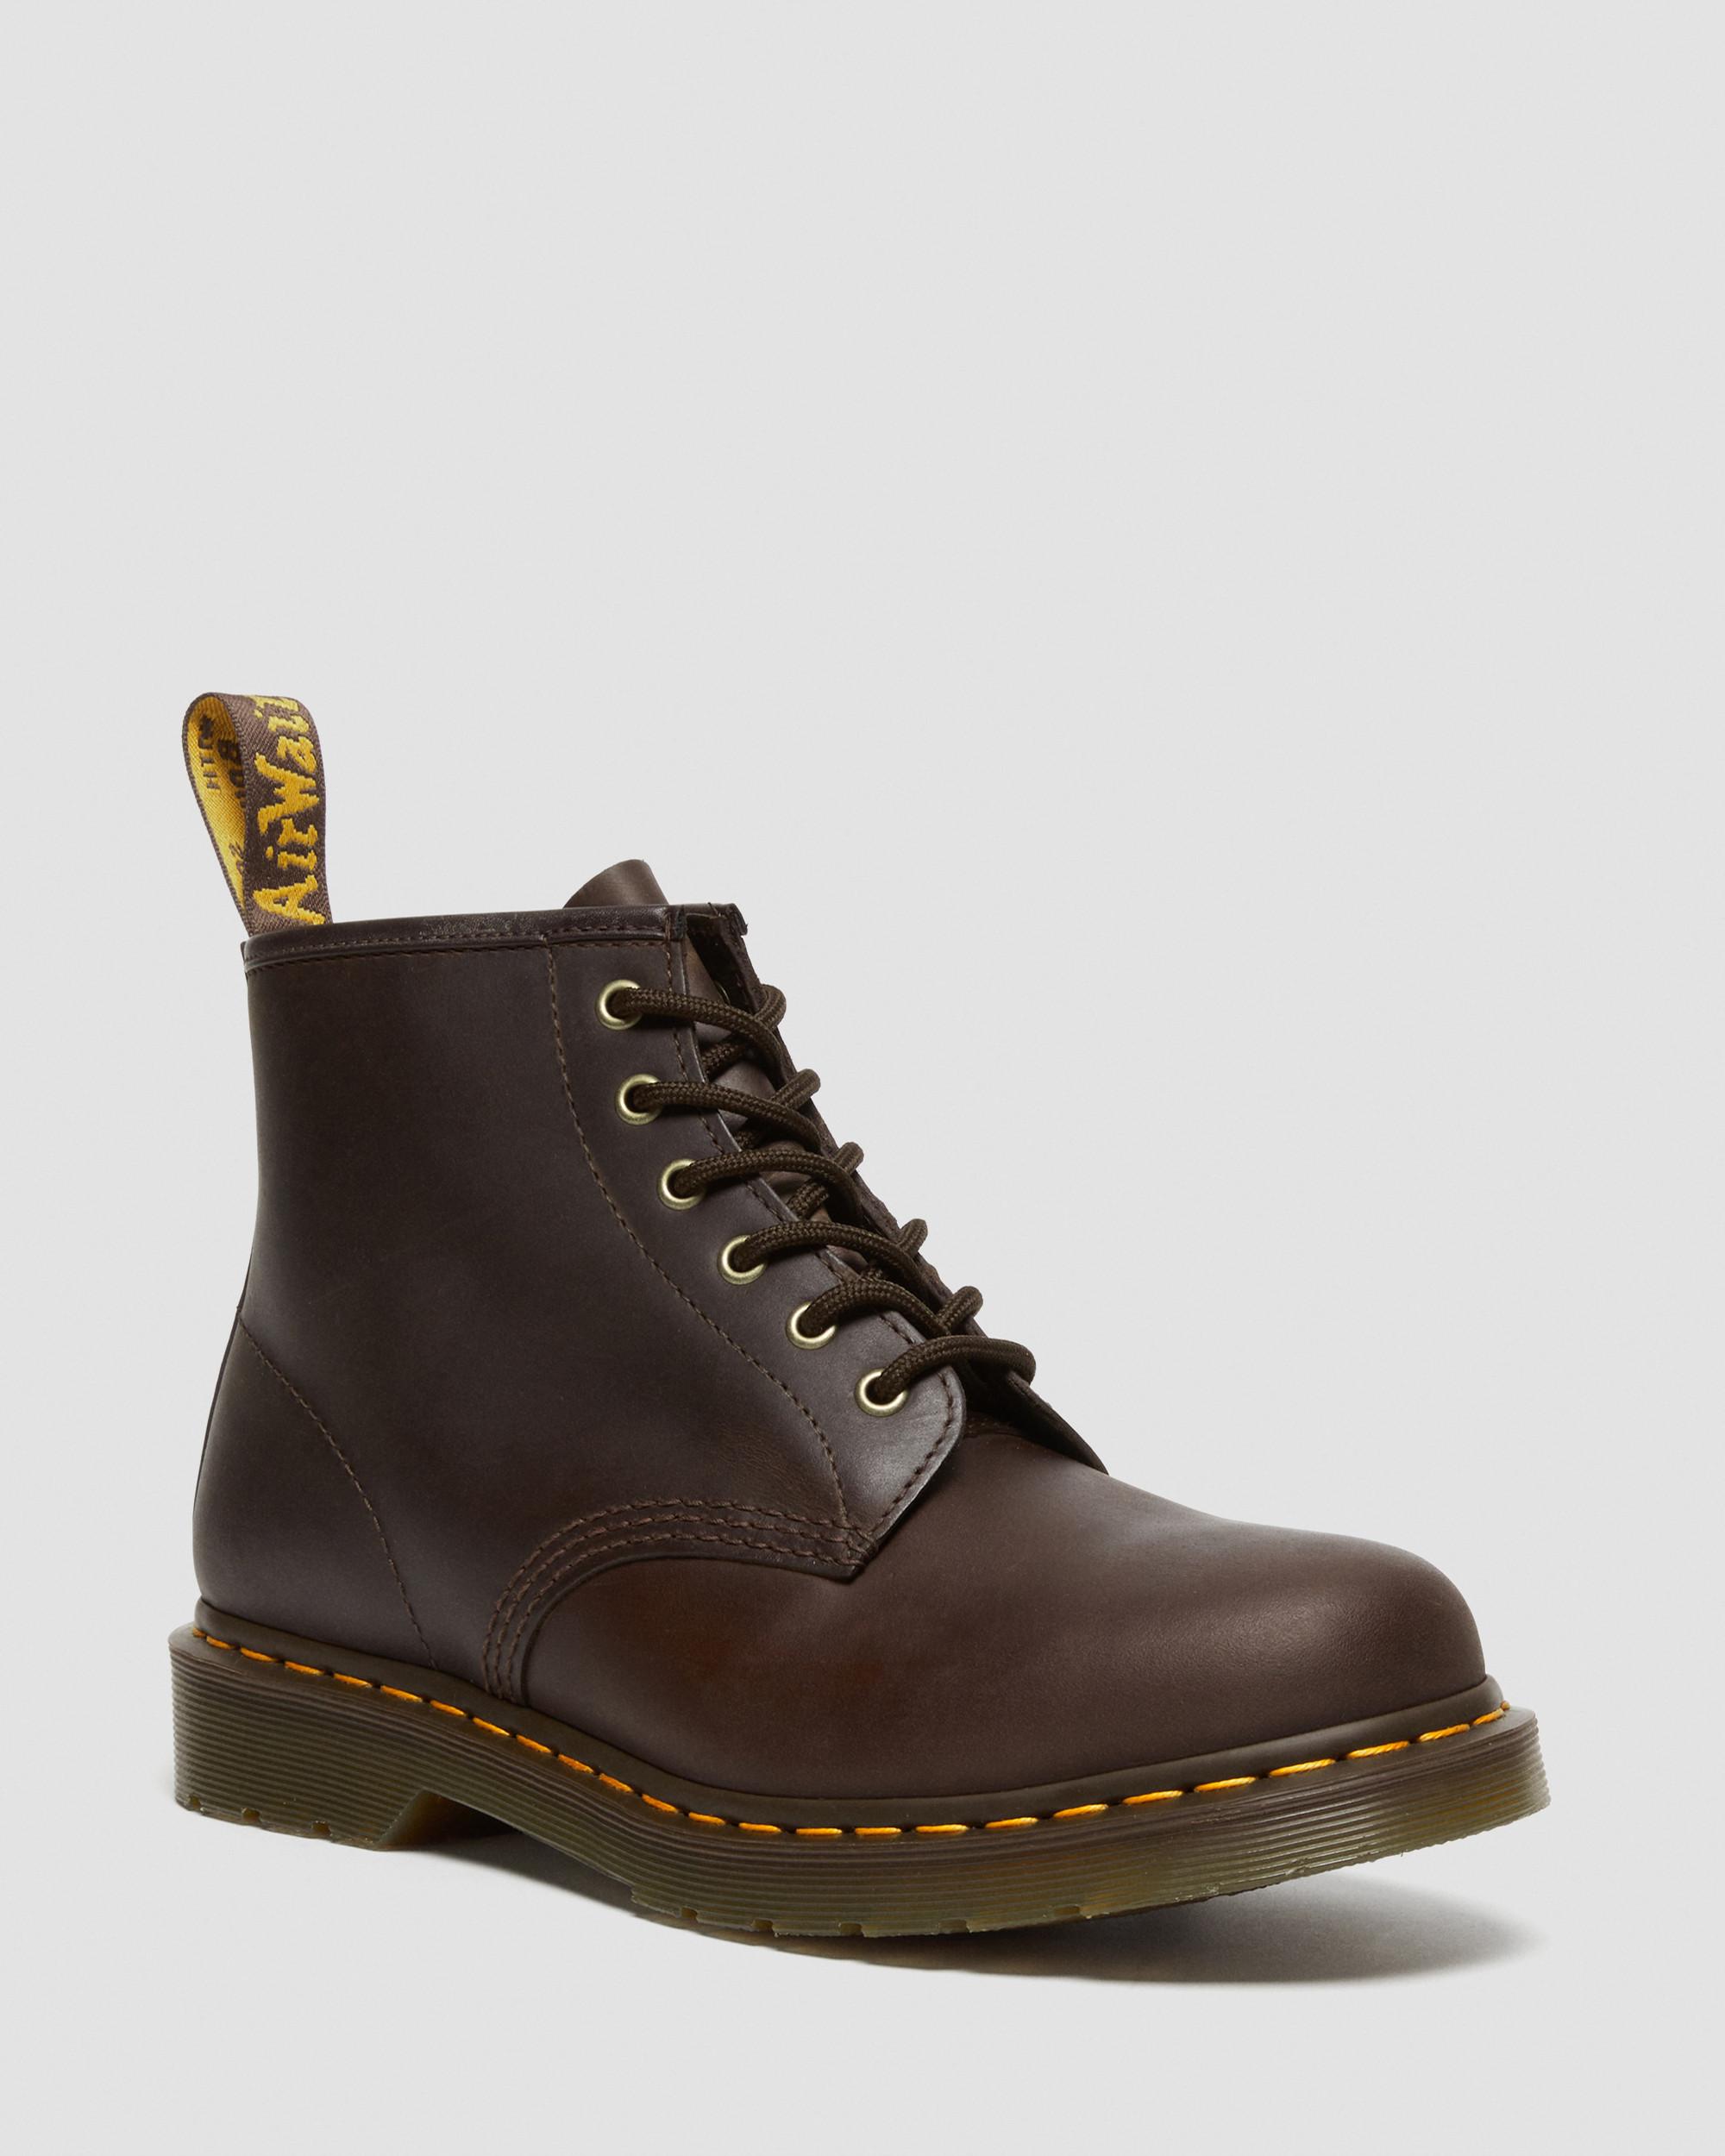 101 Crazy Horse Leather Ankle Boots, Dark Brown | Dr. Martens